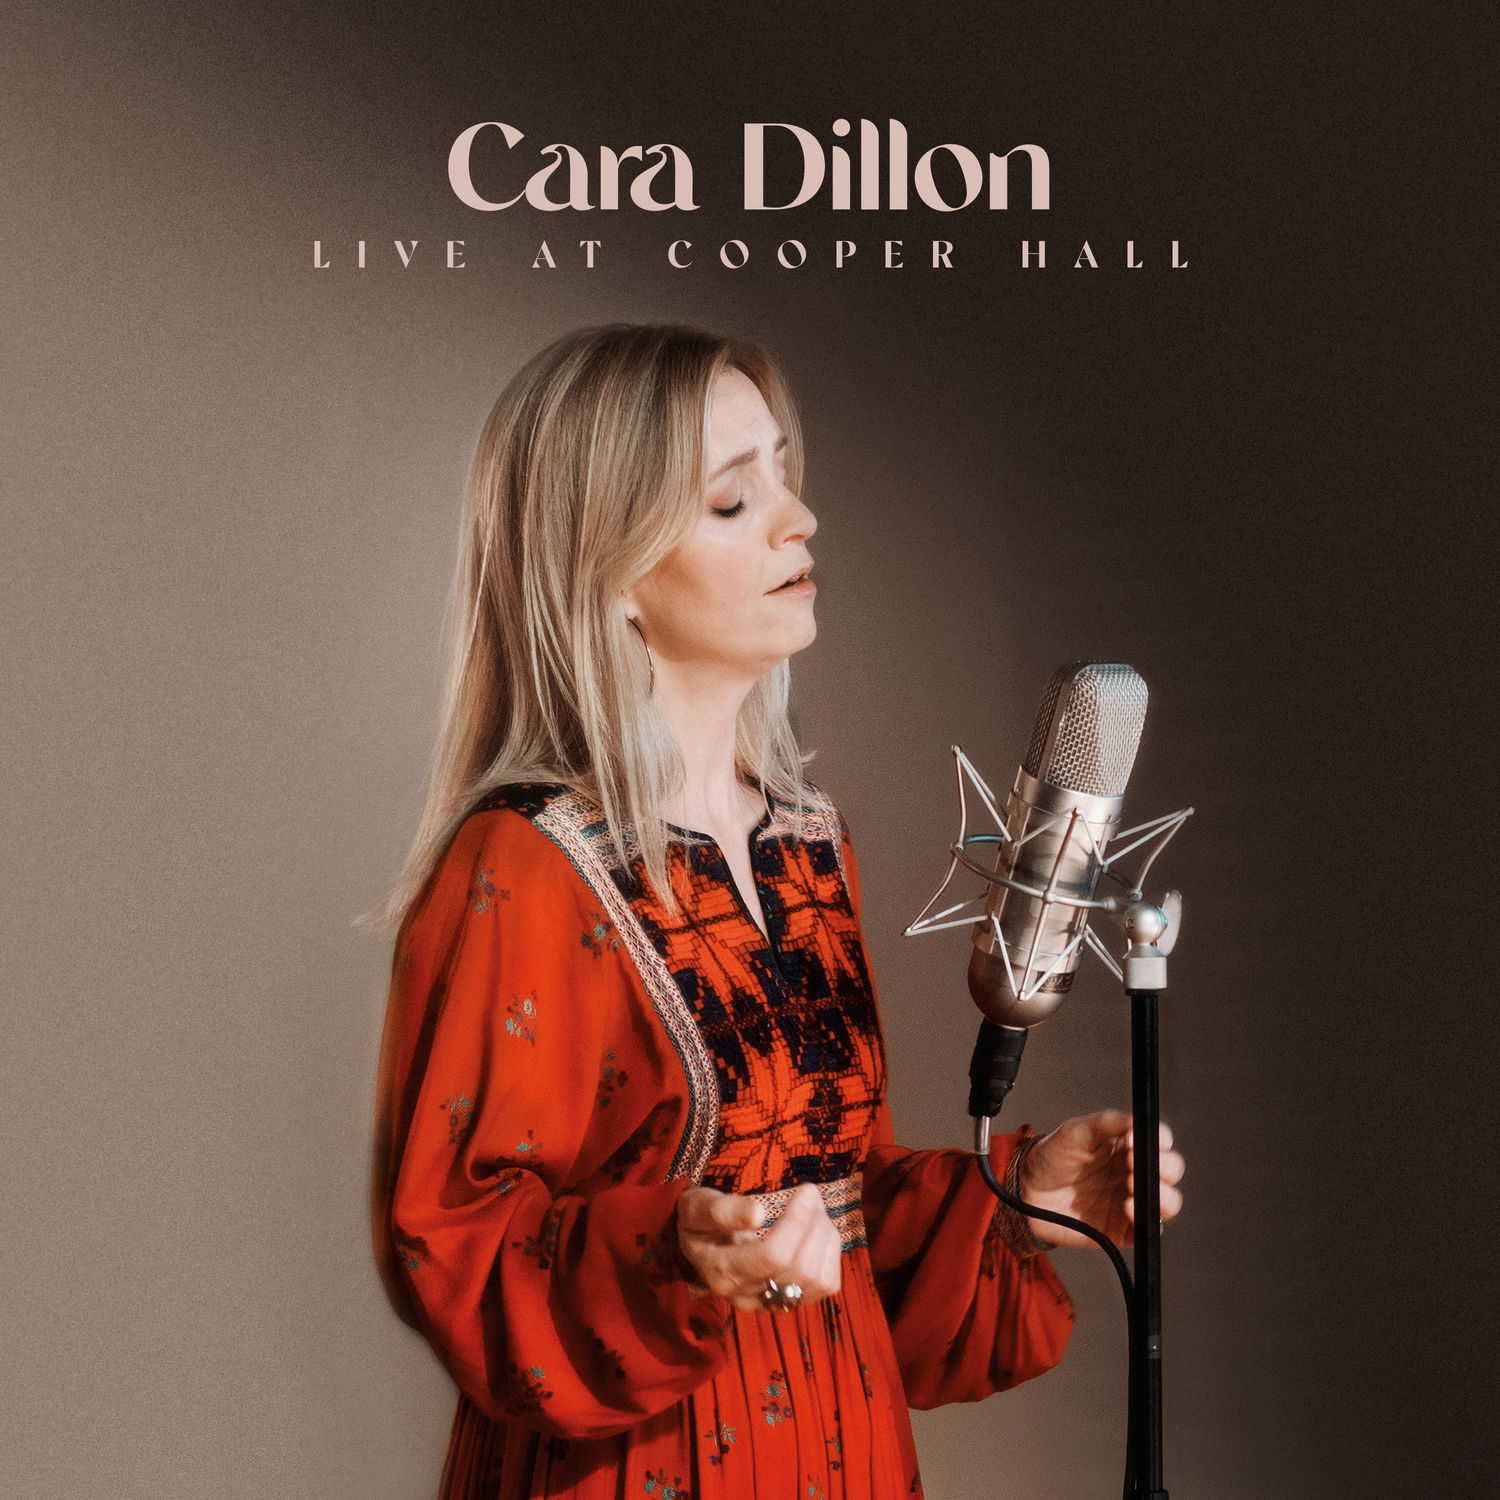 Cara Dillon – The Water is Wide (Live)【44.1kHz／16bit】德国区-OppsUpro音乐帝国